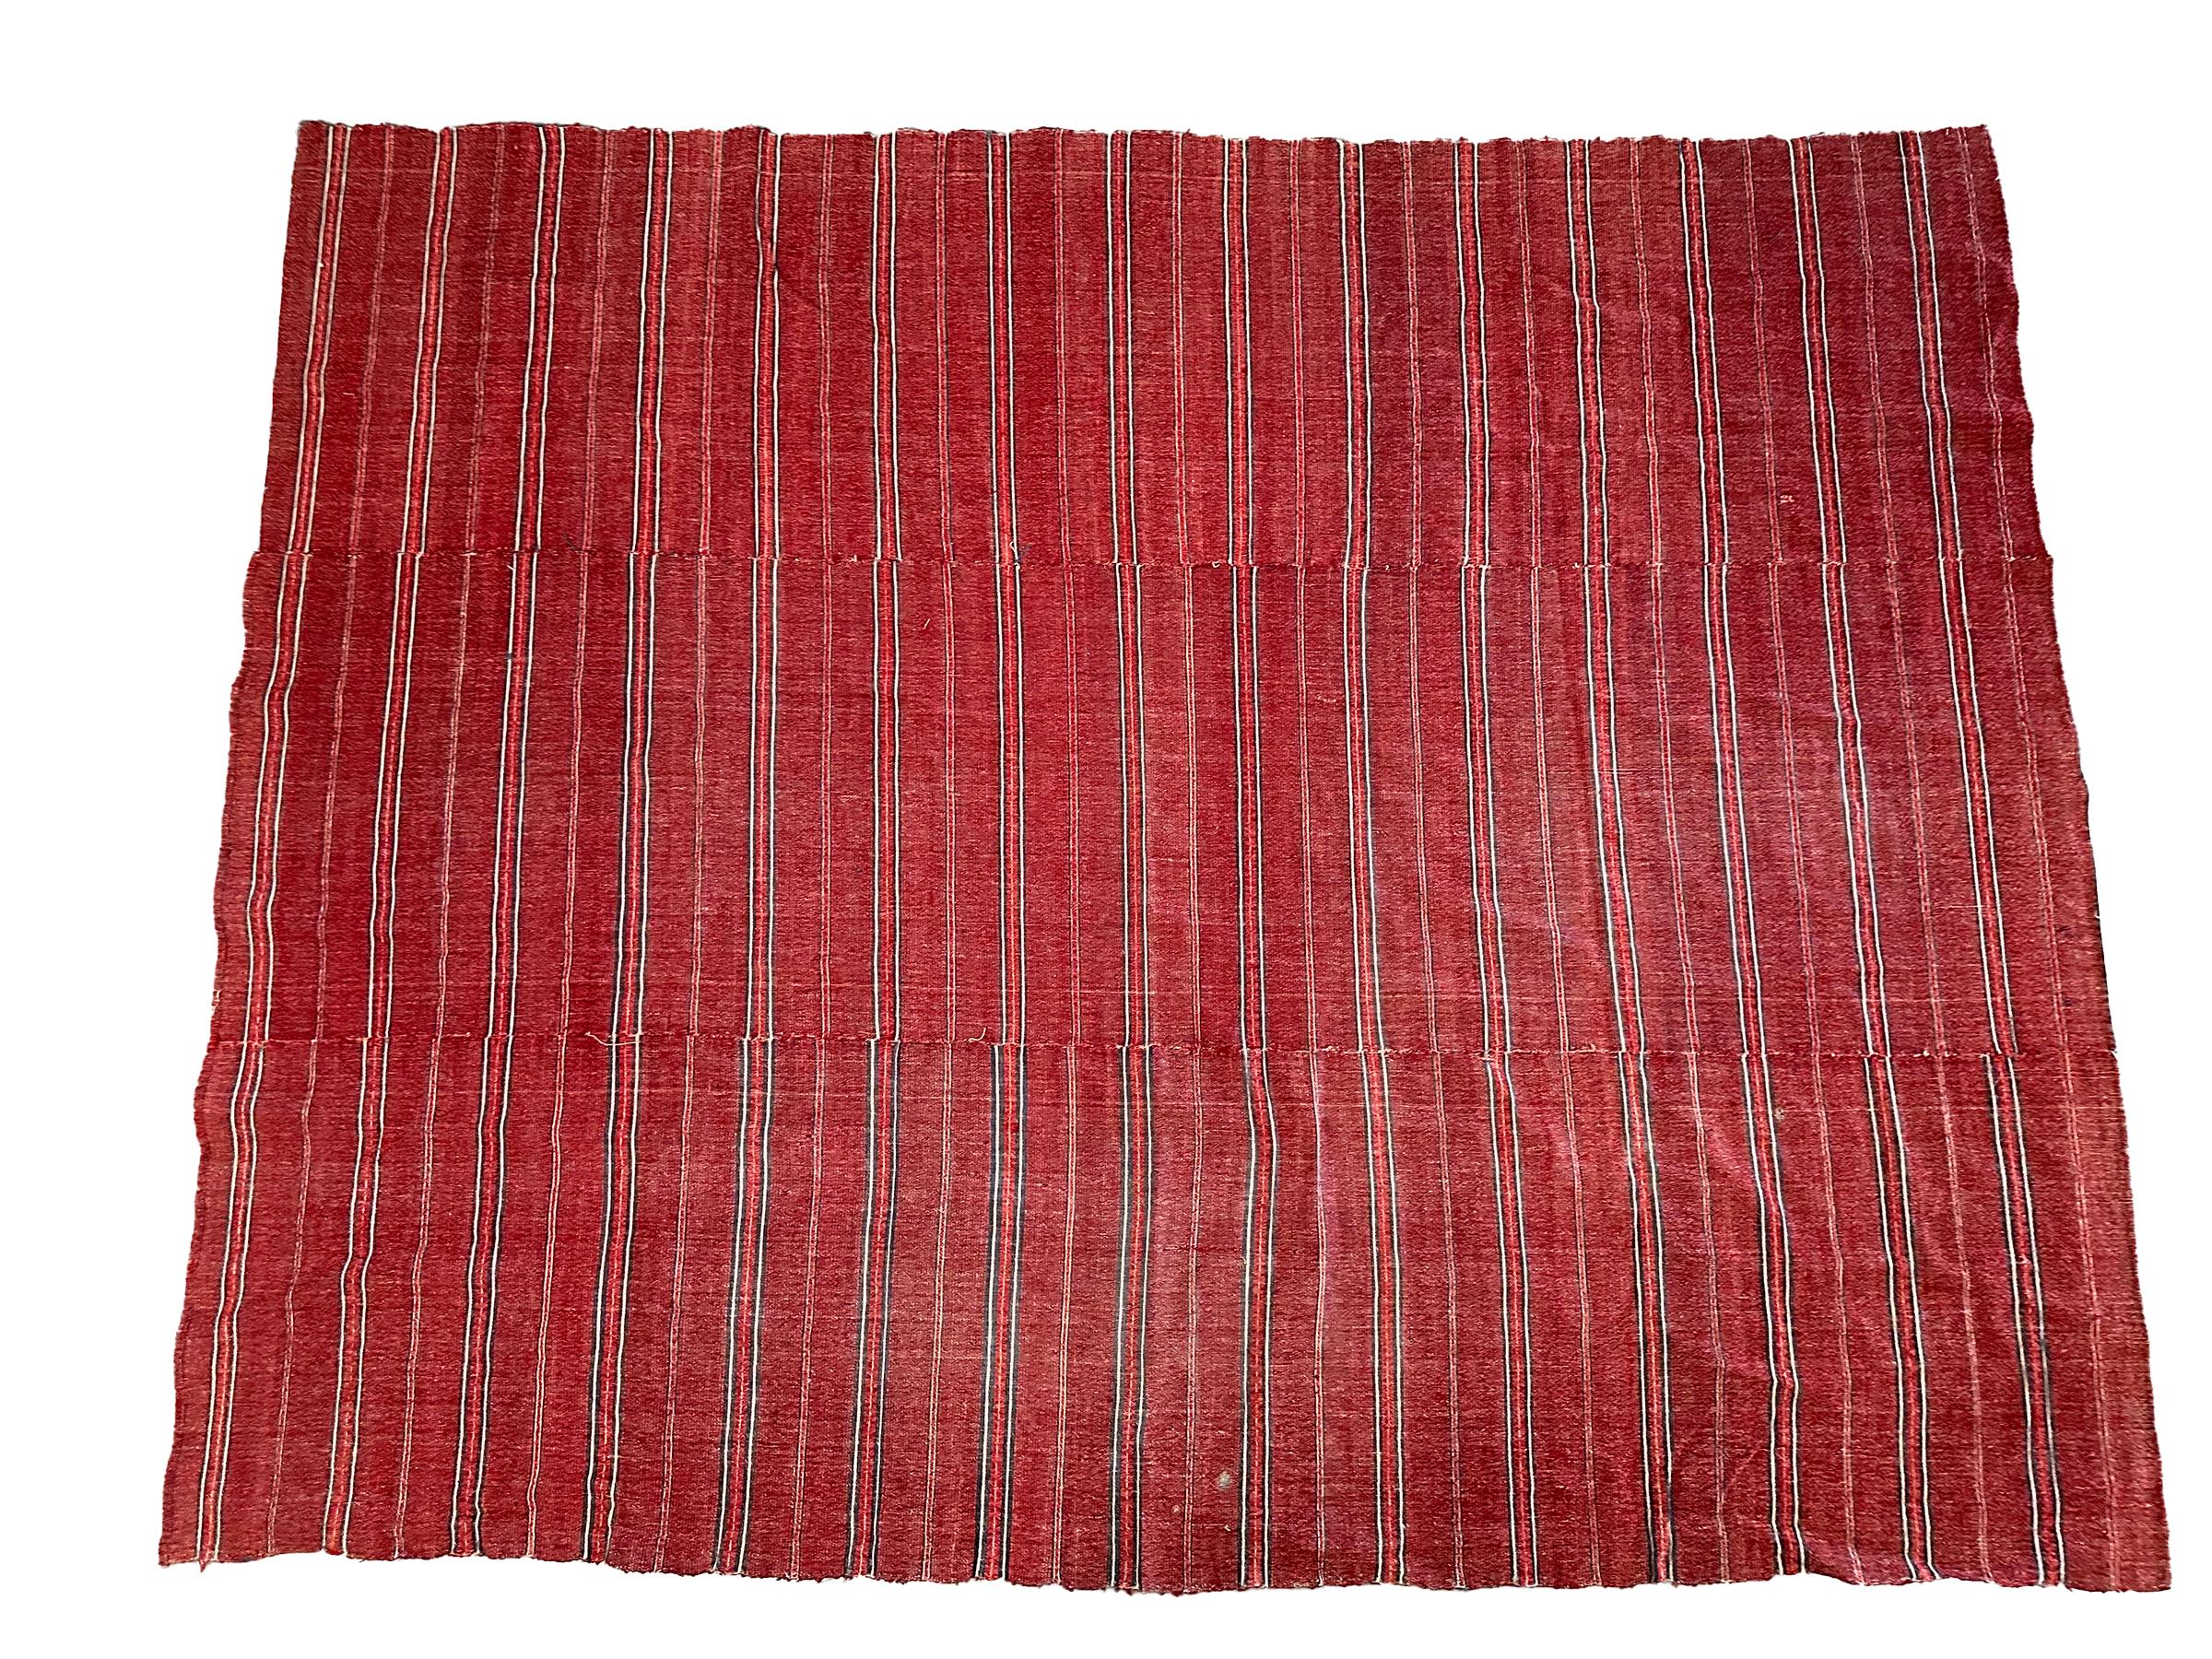 Hand-Knotted Antique Moroccan Kelim Kilim Rug Tapestry Handmade 6x8 178cm x 226cm For Sale